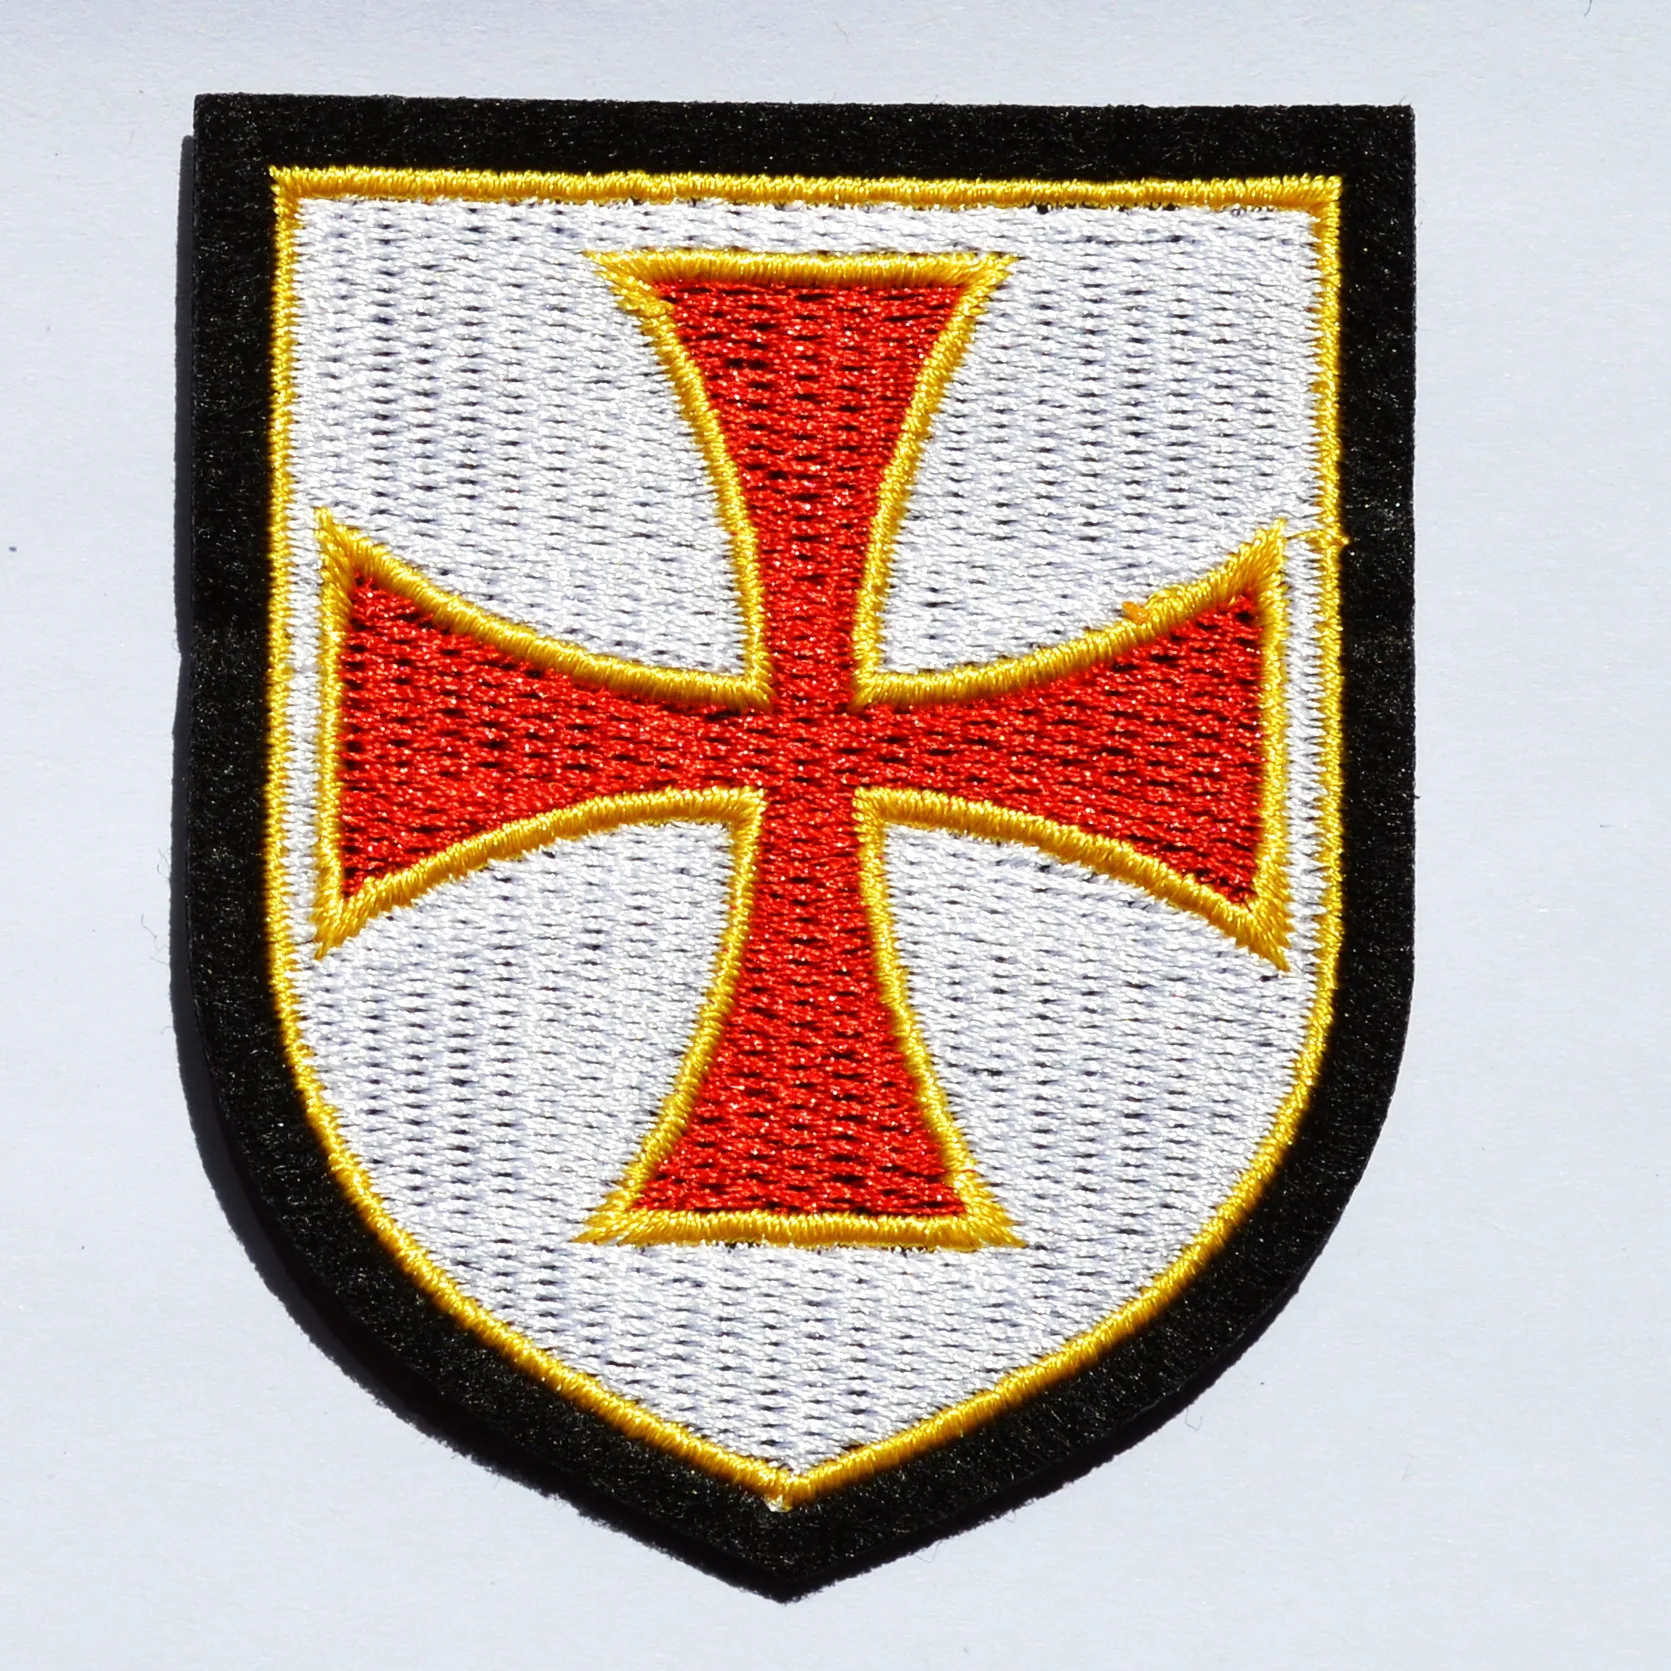 (5 pcs) CROSS CHRIST KNIGHTS TEMPLAR SHIELD Red White Yellow CHRISTIAN Logo ワッペン Iron on PATCH Embroidery Sewing thermocollan